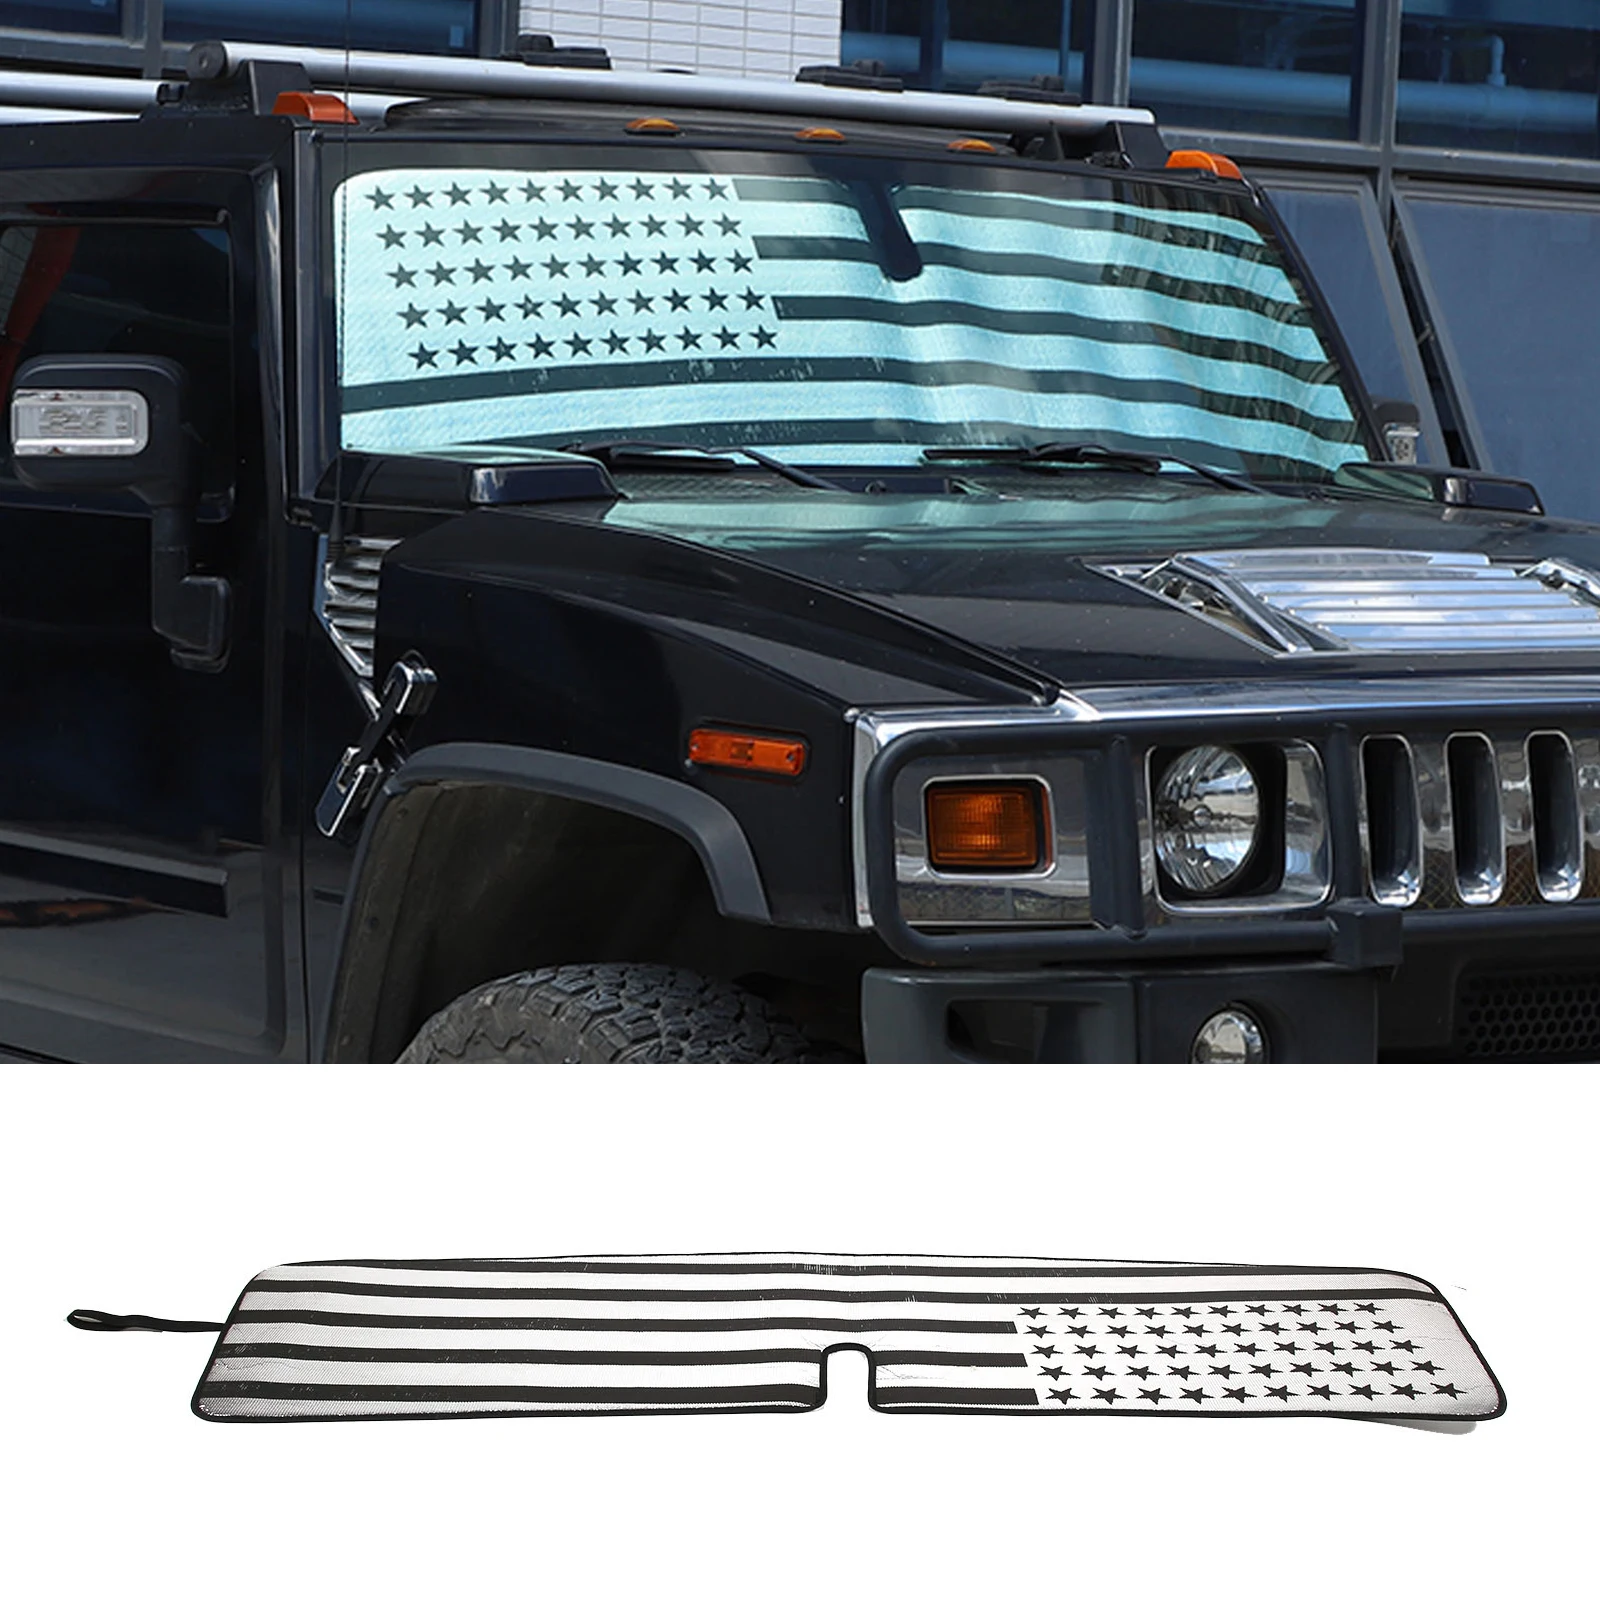 

For Hummer H2 H3 2003-2009 Car Styling Silver Car forward Windshield Sunshade Car Solar Protection pad Car Accessories